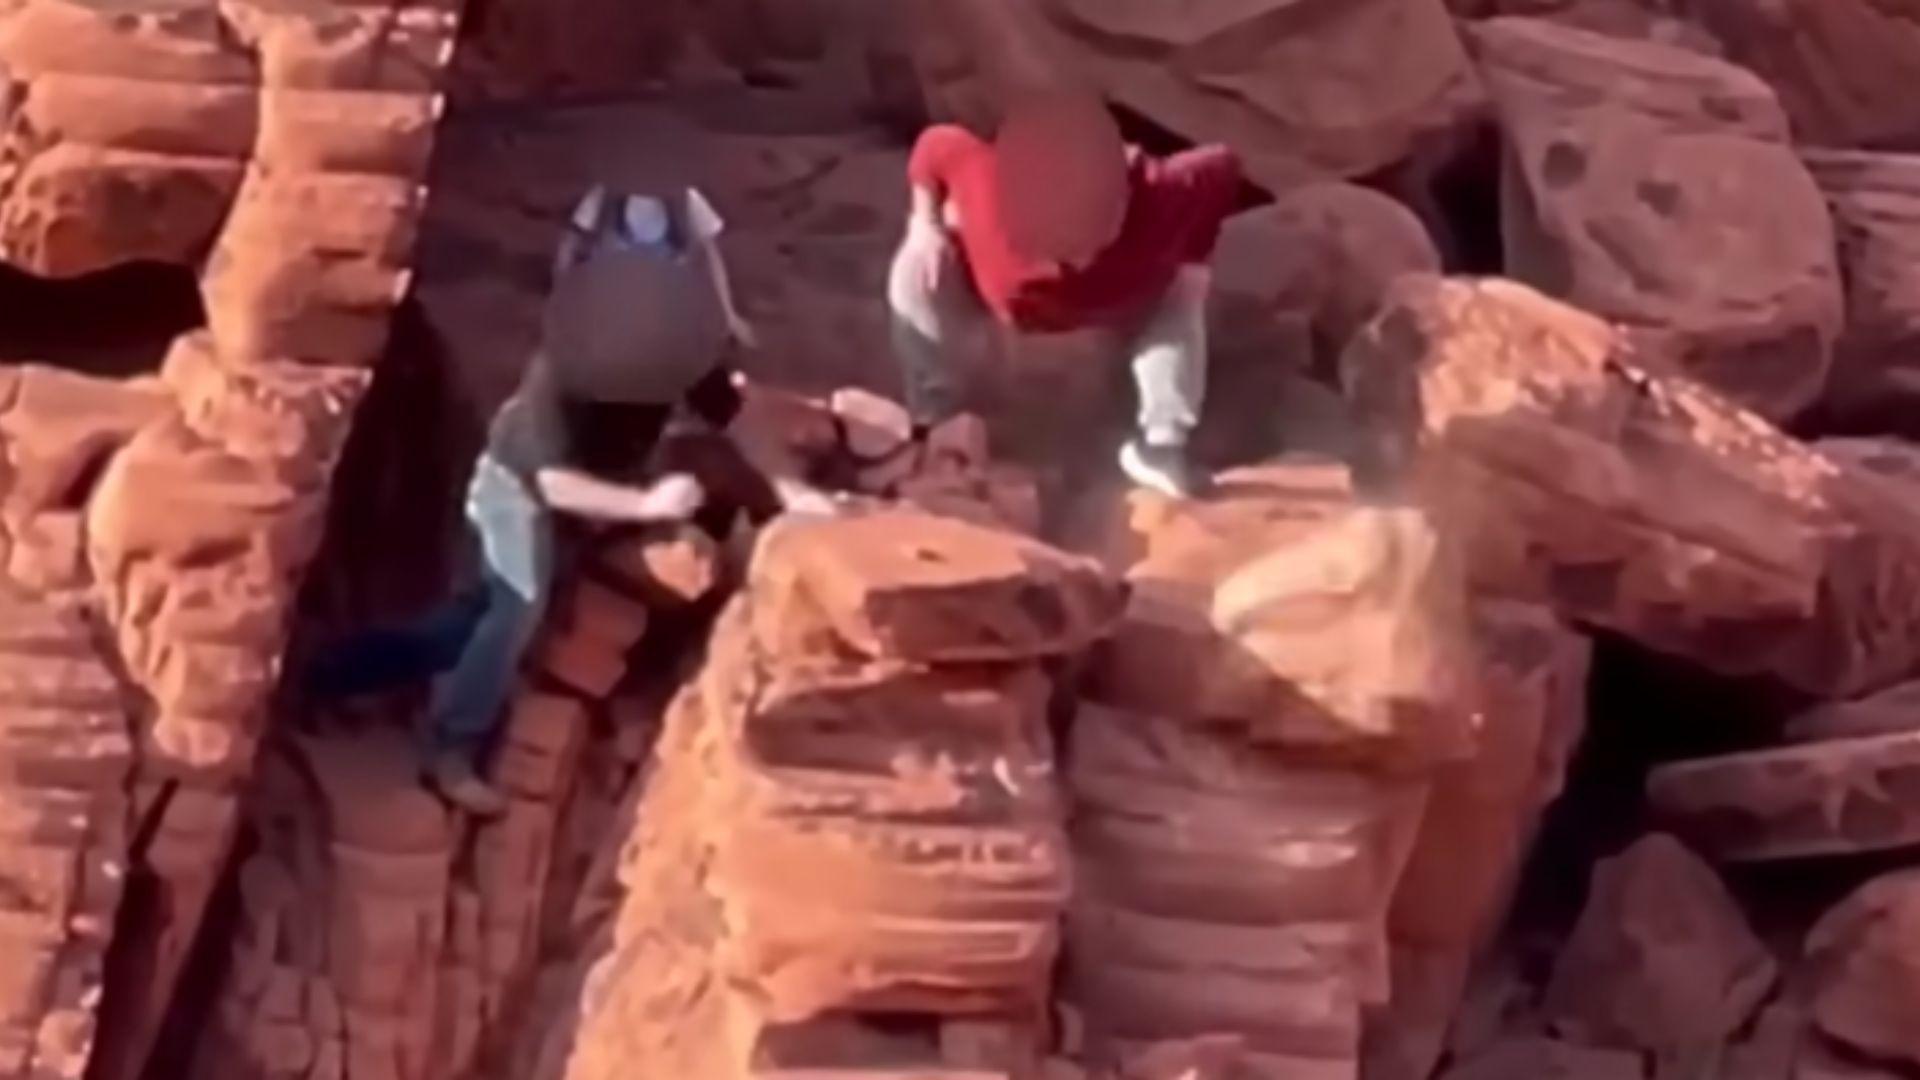 <p>On April 7, 2024, one visitor to the Lake Mead Recreation Area noticed two men climbing a restricted area of natural rock formations. This visitor was certainly concerned by the men’s actions as they weren’t admiring the rocks, they were destroying them. </p> <p>The visitor then started recording a damning video on their phone that clearly shows the men knocking down rocks that had formed over 140 million years ago. </p>